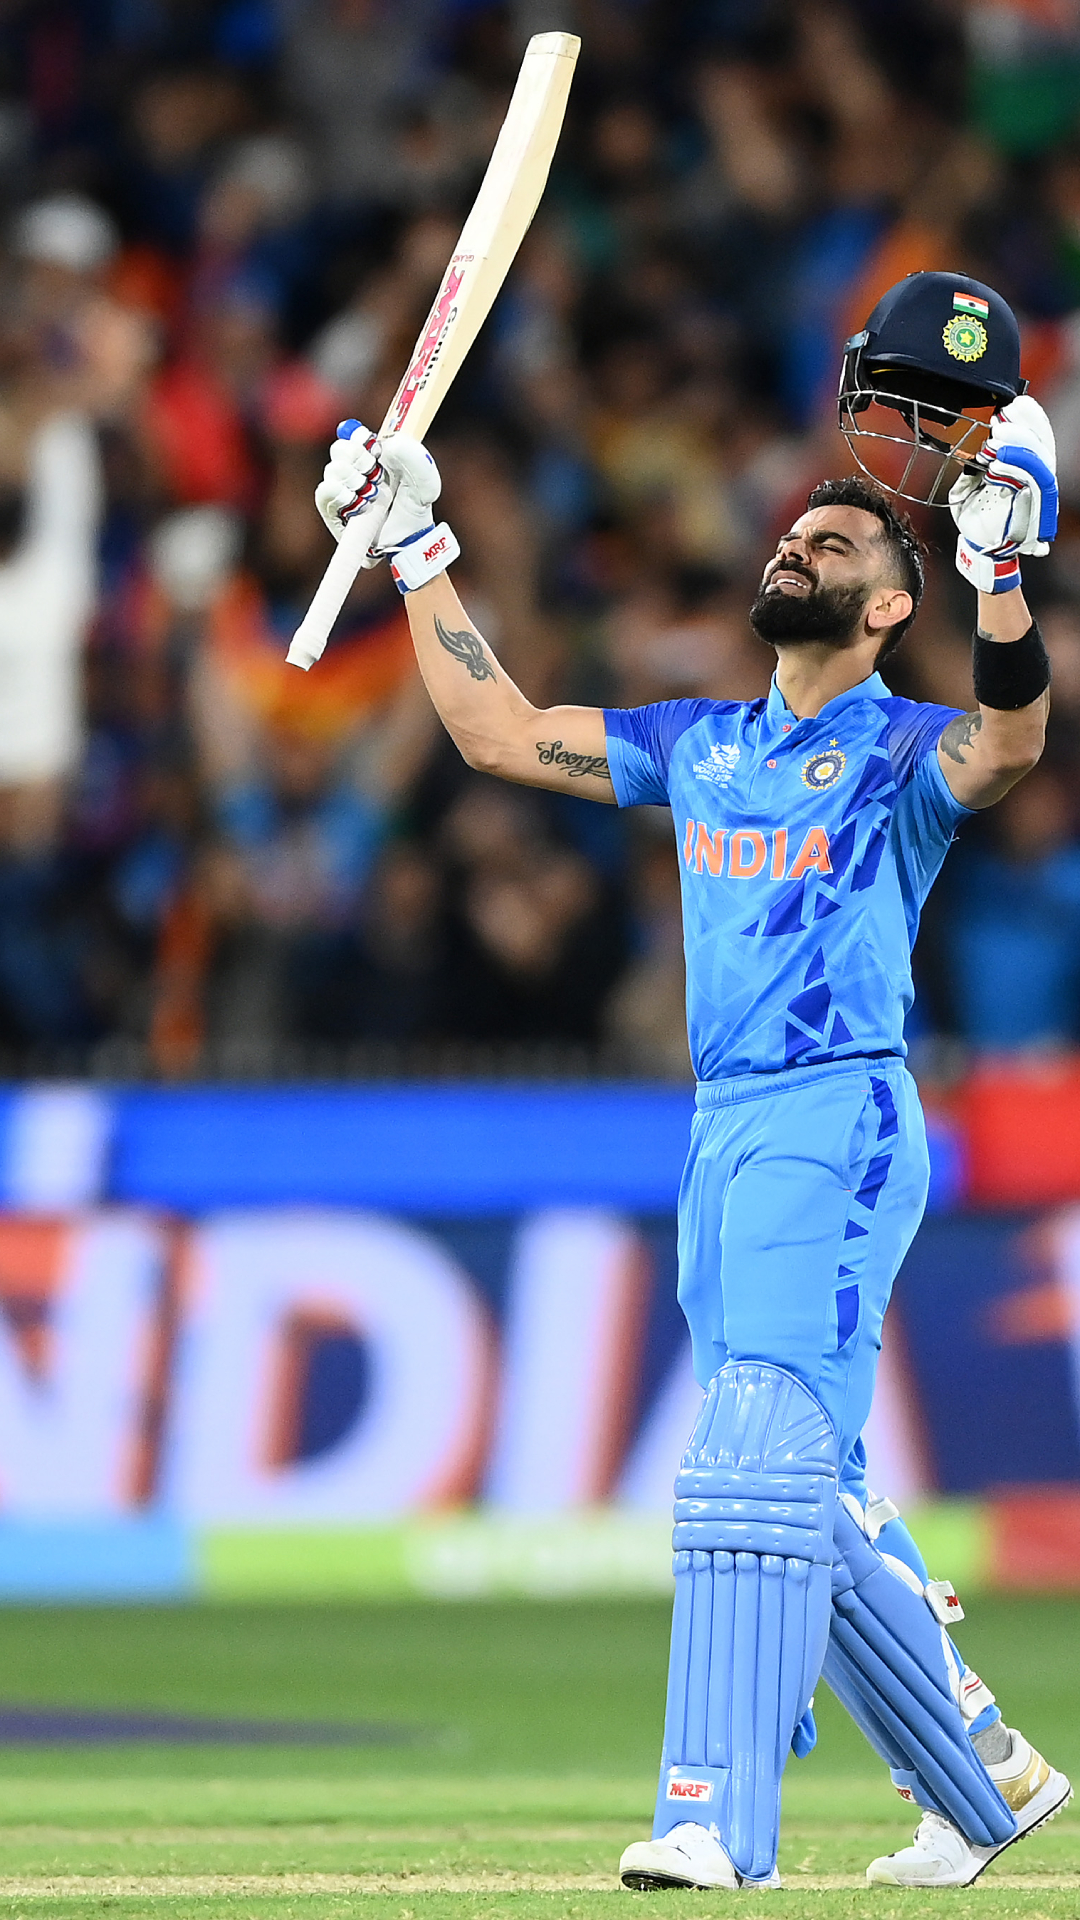 T20 World Cup | Virat Kohli to Kusal Mendis - Who's got most runs in tournament (As of 5th November)